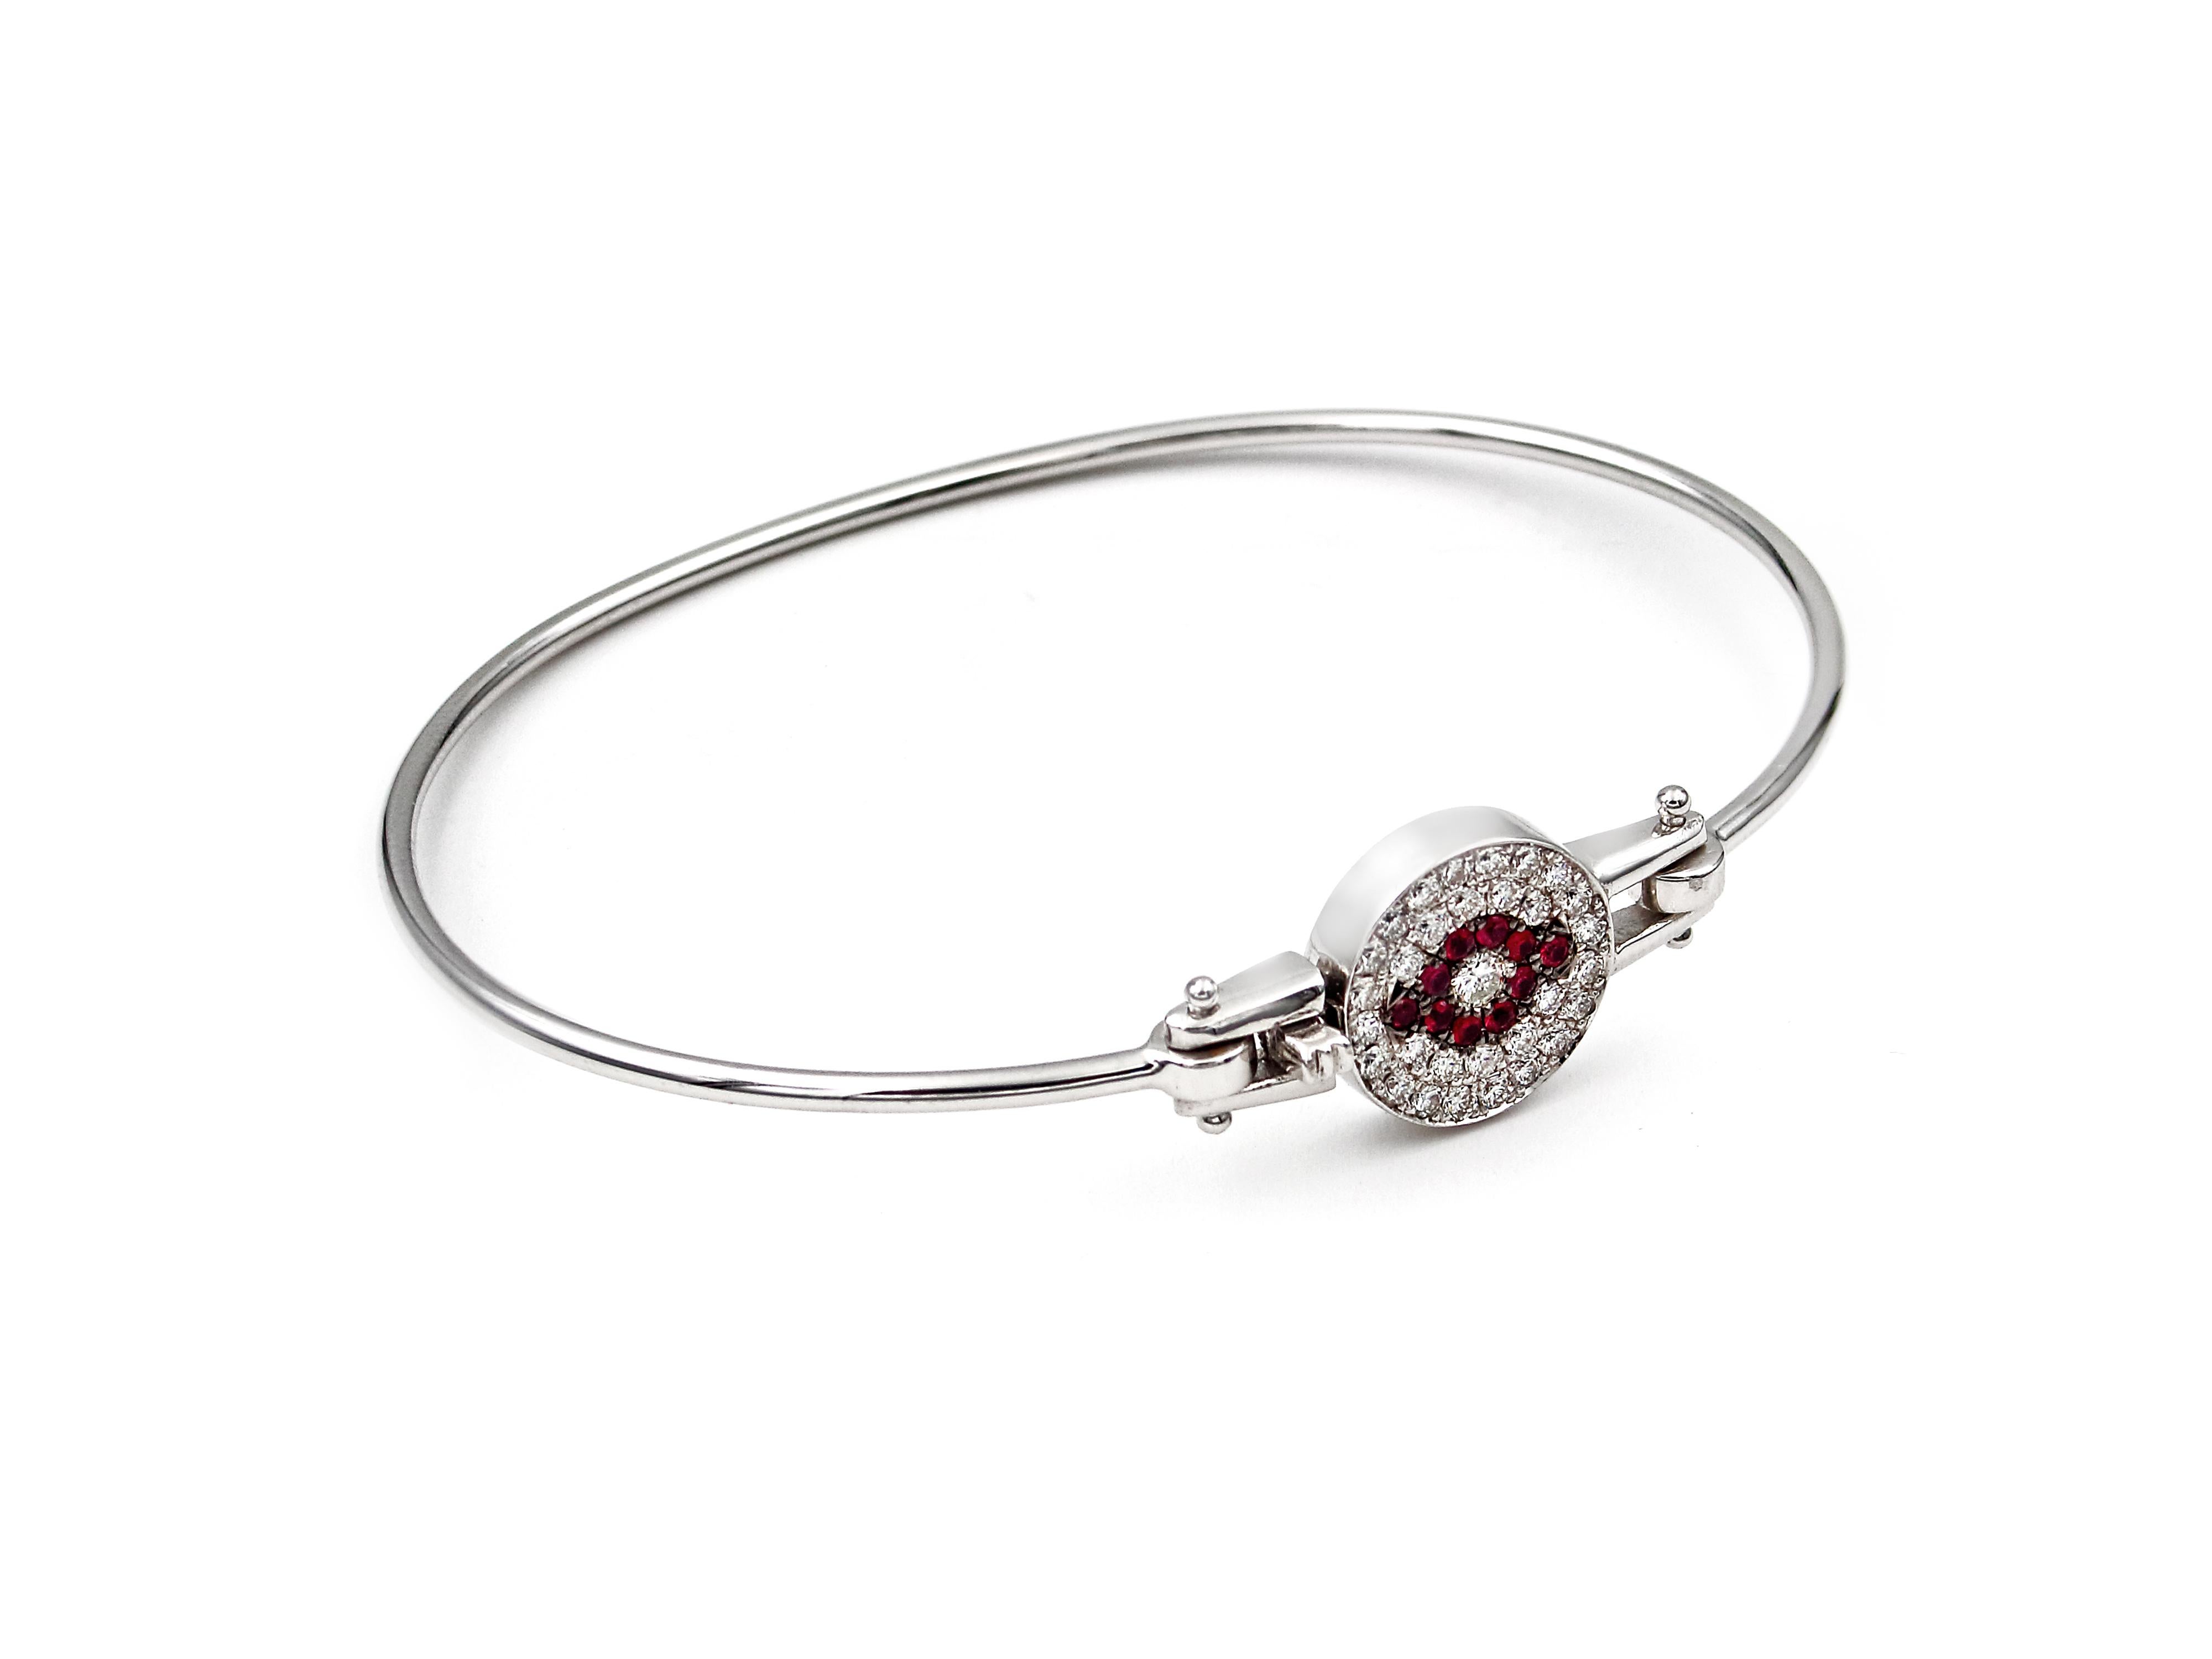 The first evil eye on a bangle bracelet. A solid 18k white gold bangle wire that hosts 0.43 karats brilliant cut diamond circle with 0.13 karats rubies forming the famous evil eye that is there to wear  off the negative energy and protect you from